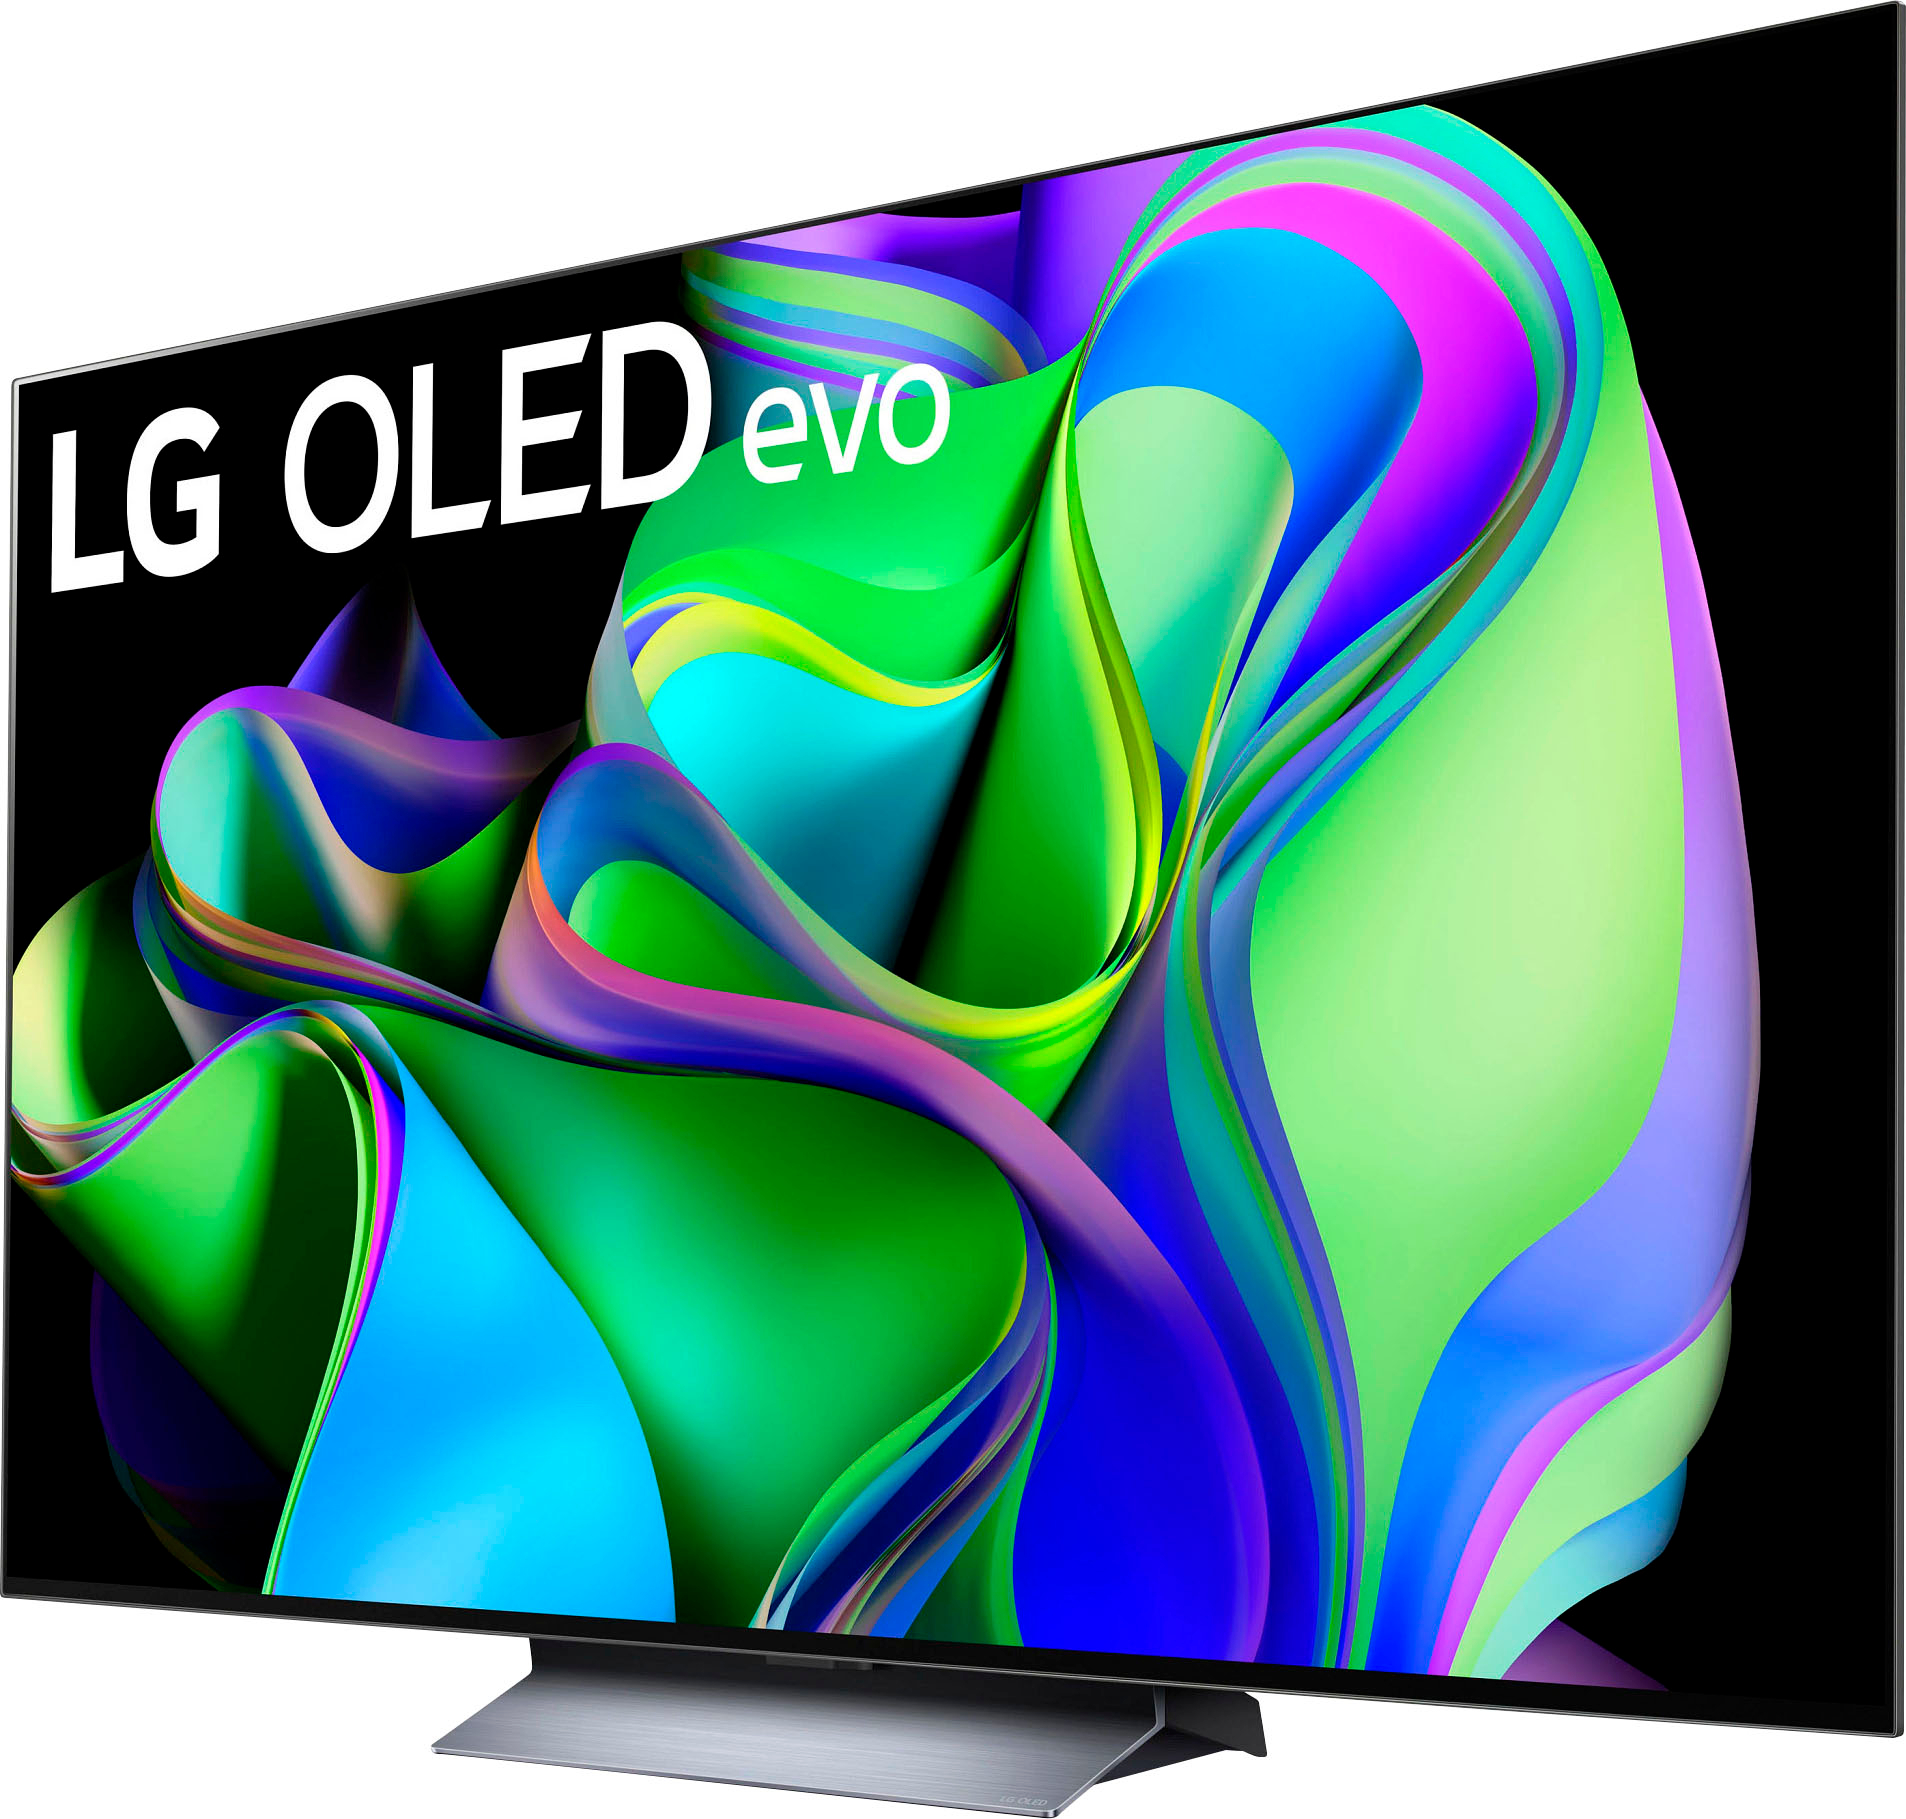 On trial: LG's OLED C3 television